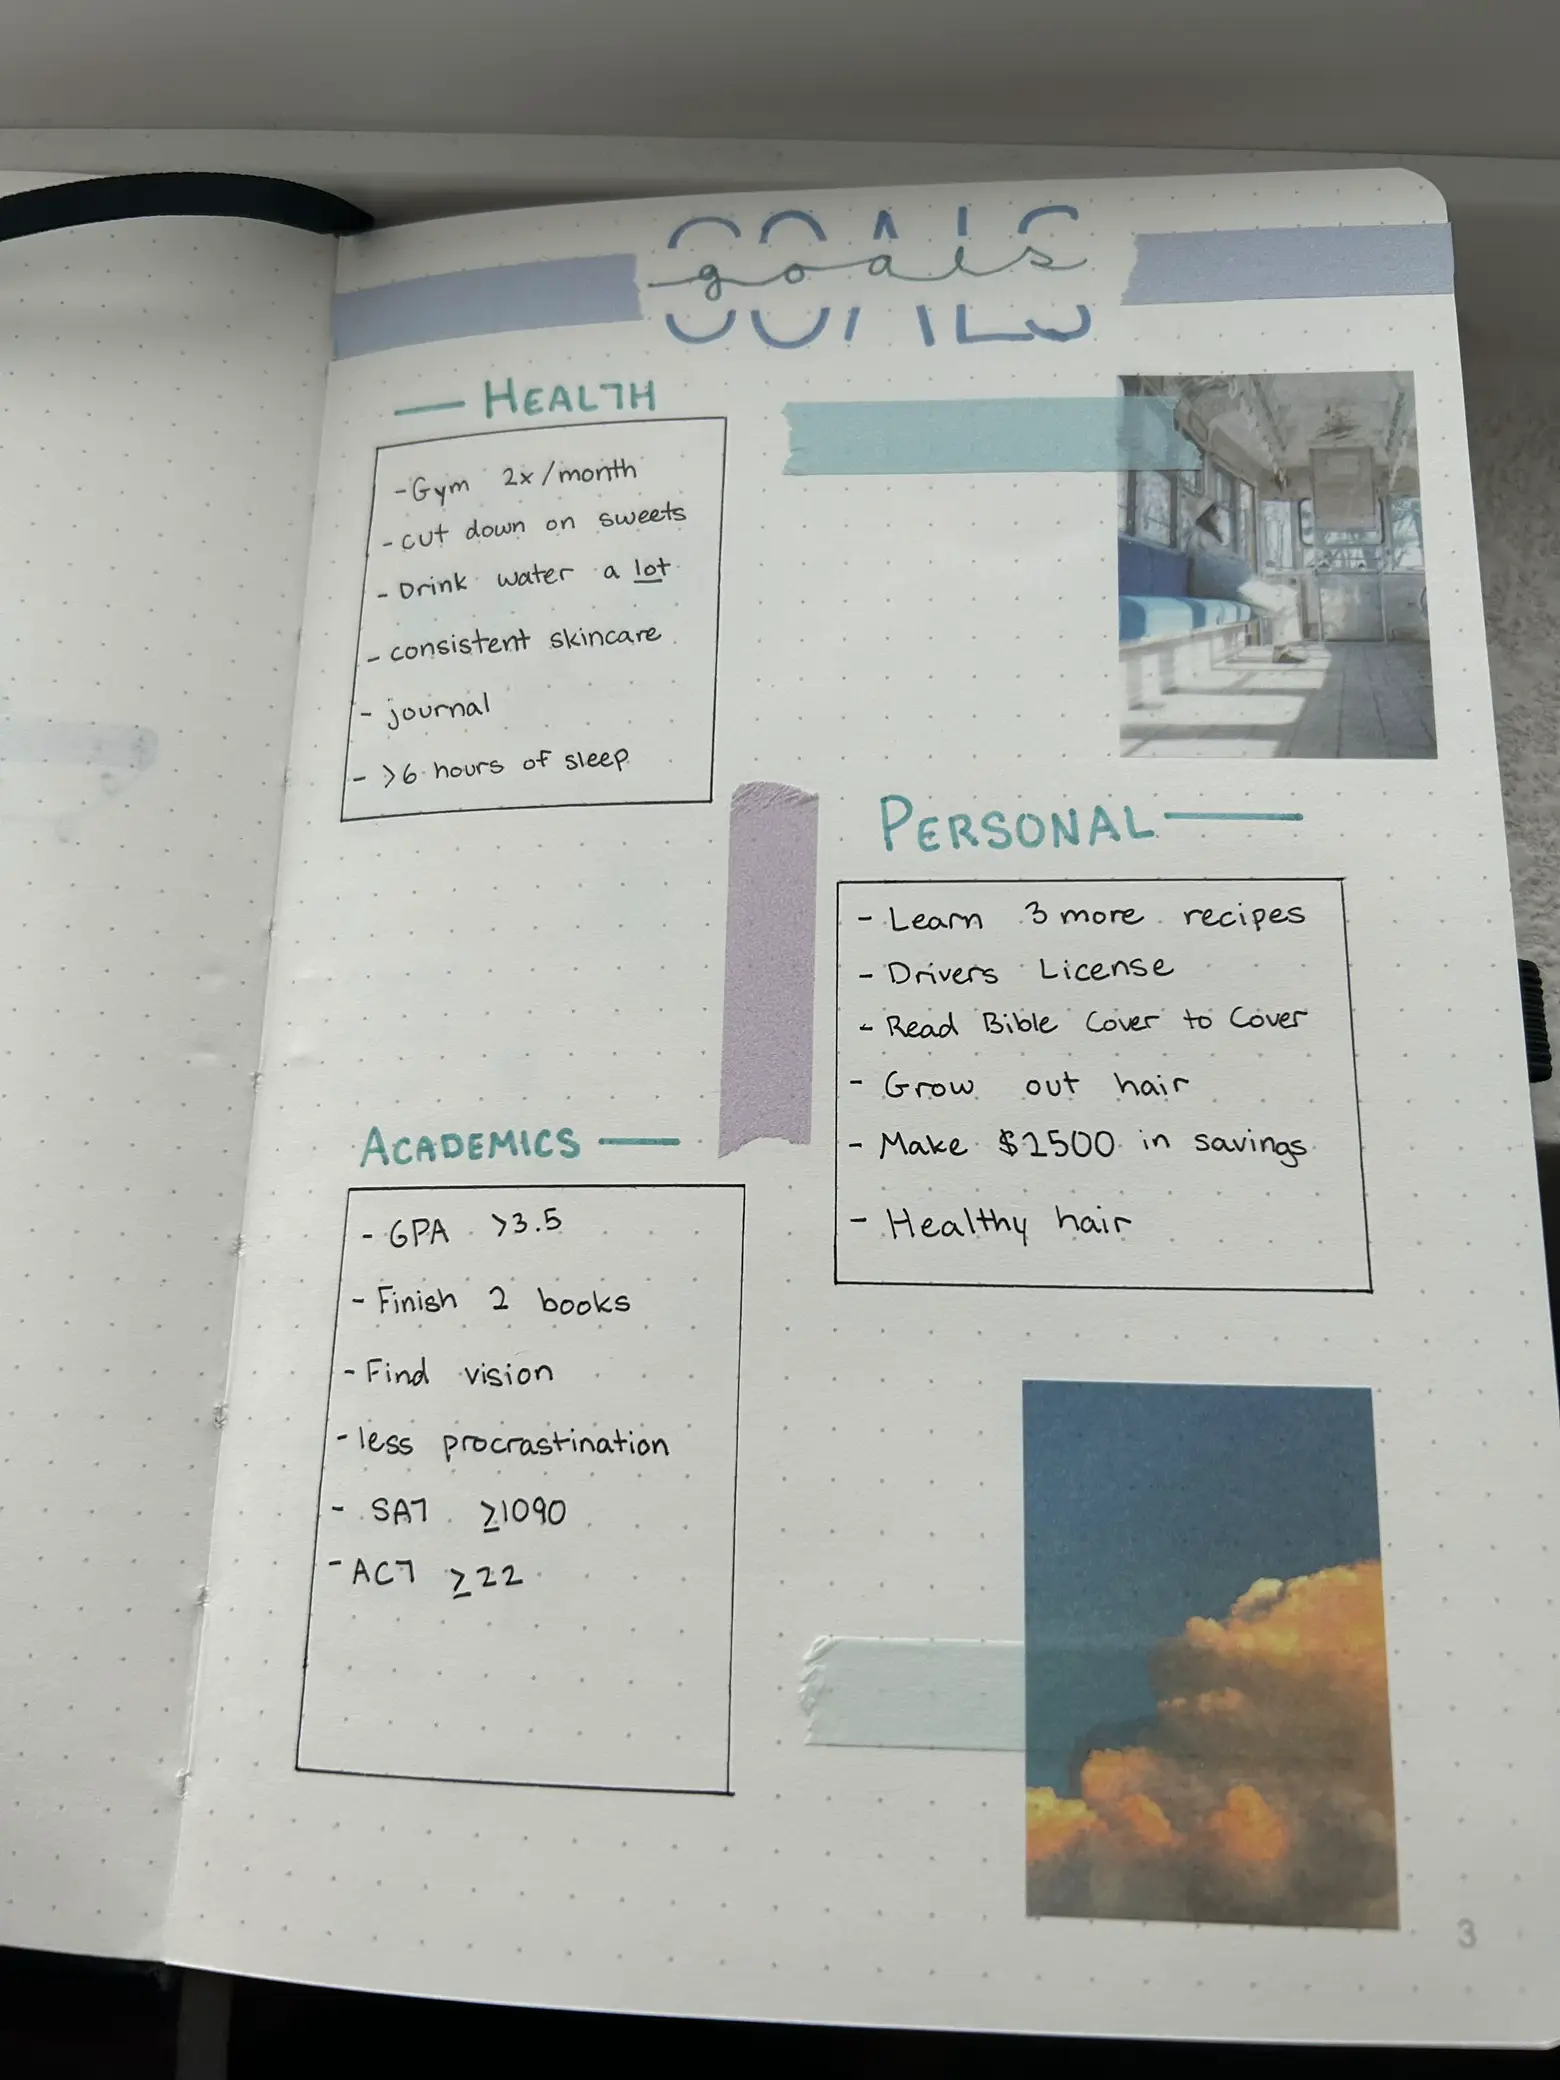 Pack Lecture - Recharges bullet journal - Make Your Bullet